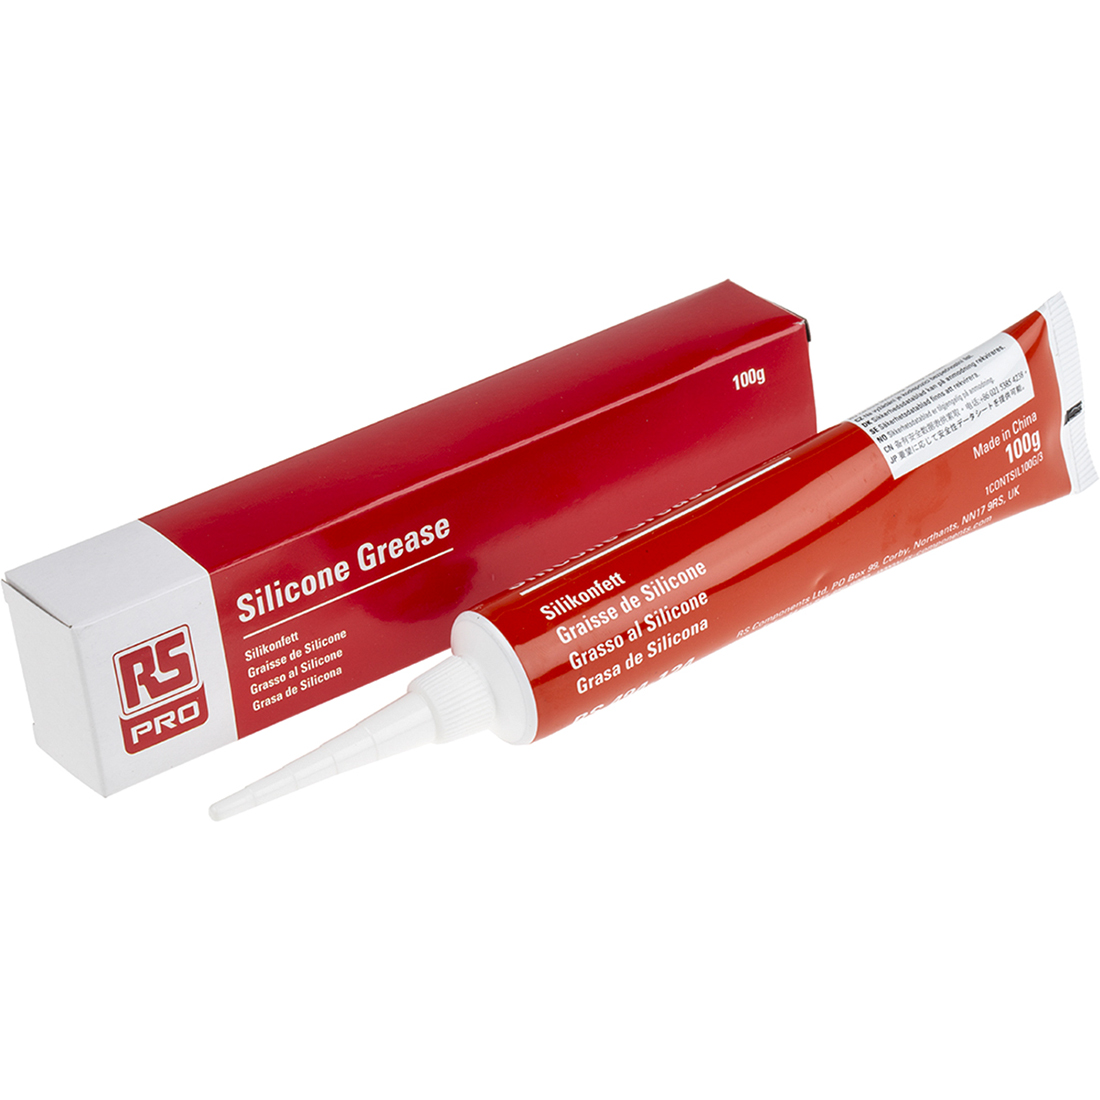 RS PRO Silicone Grease 100 g Tube